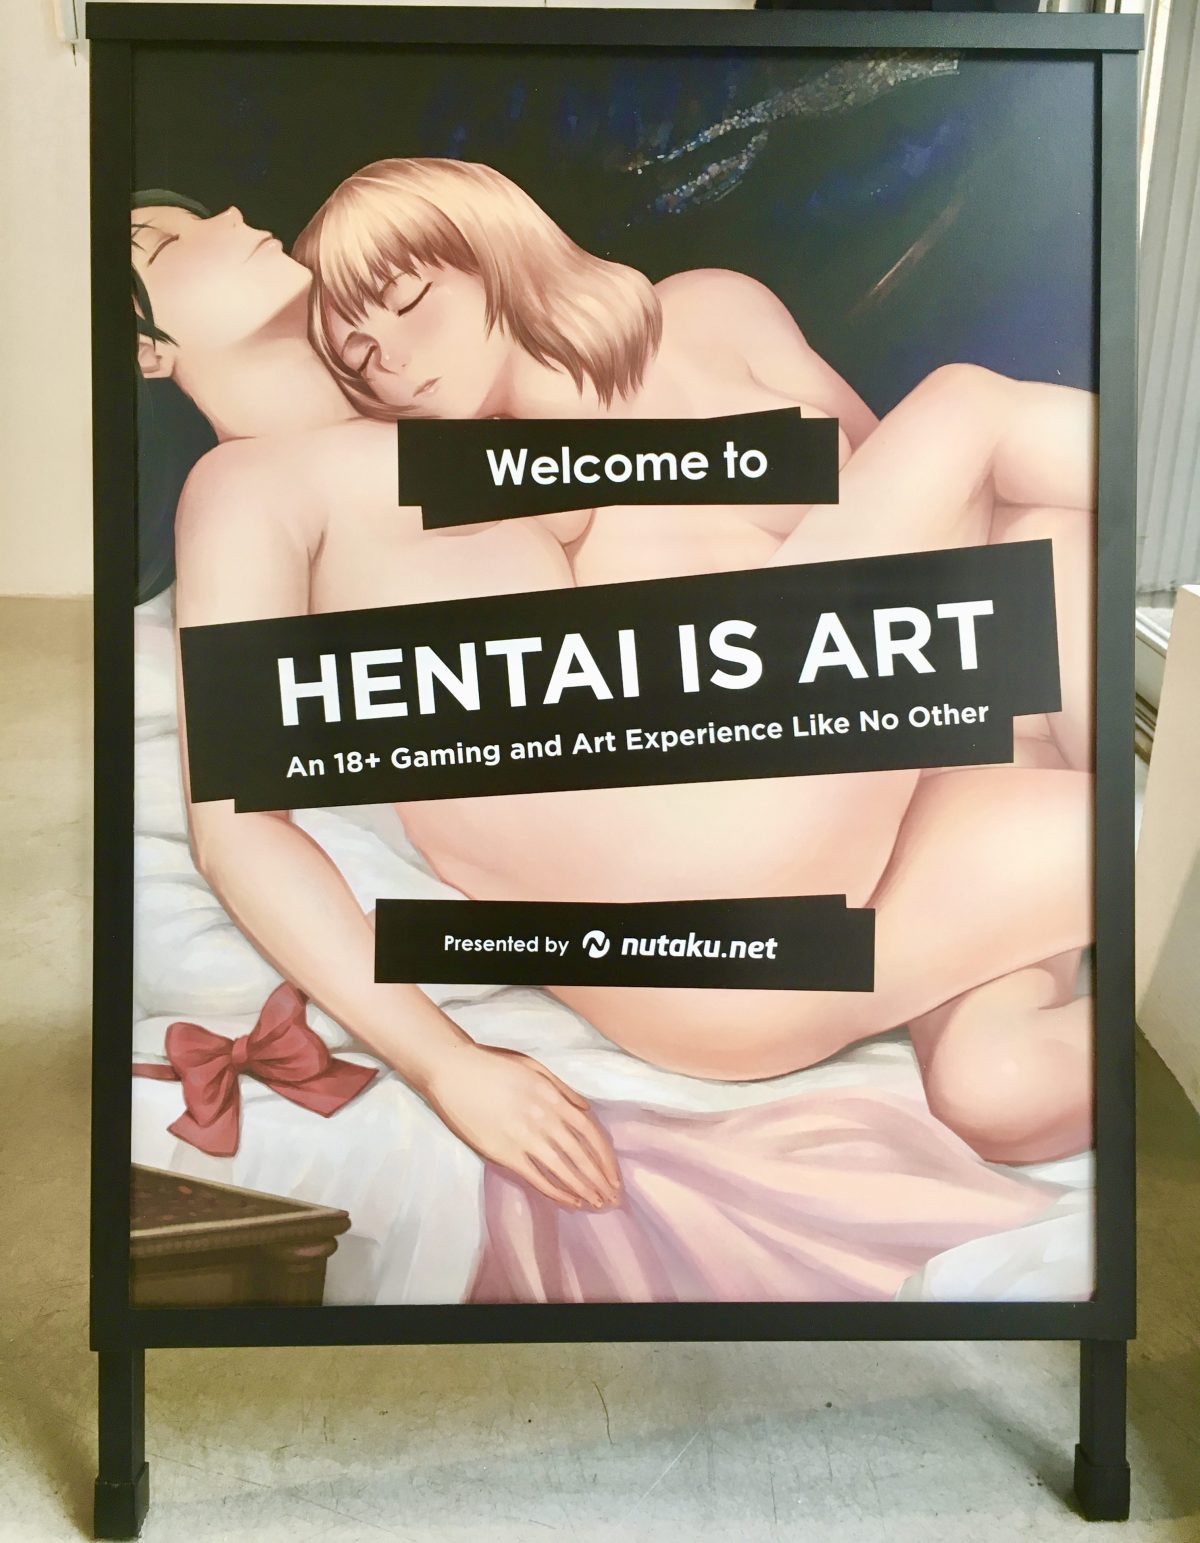 There is most definitely a taboo surrounding adult gaming and Hentai (Insta...